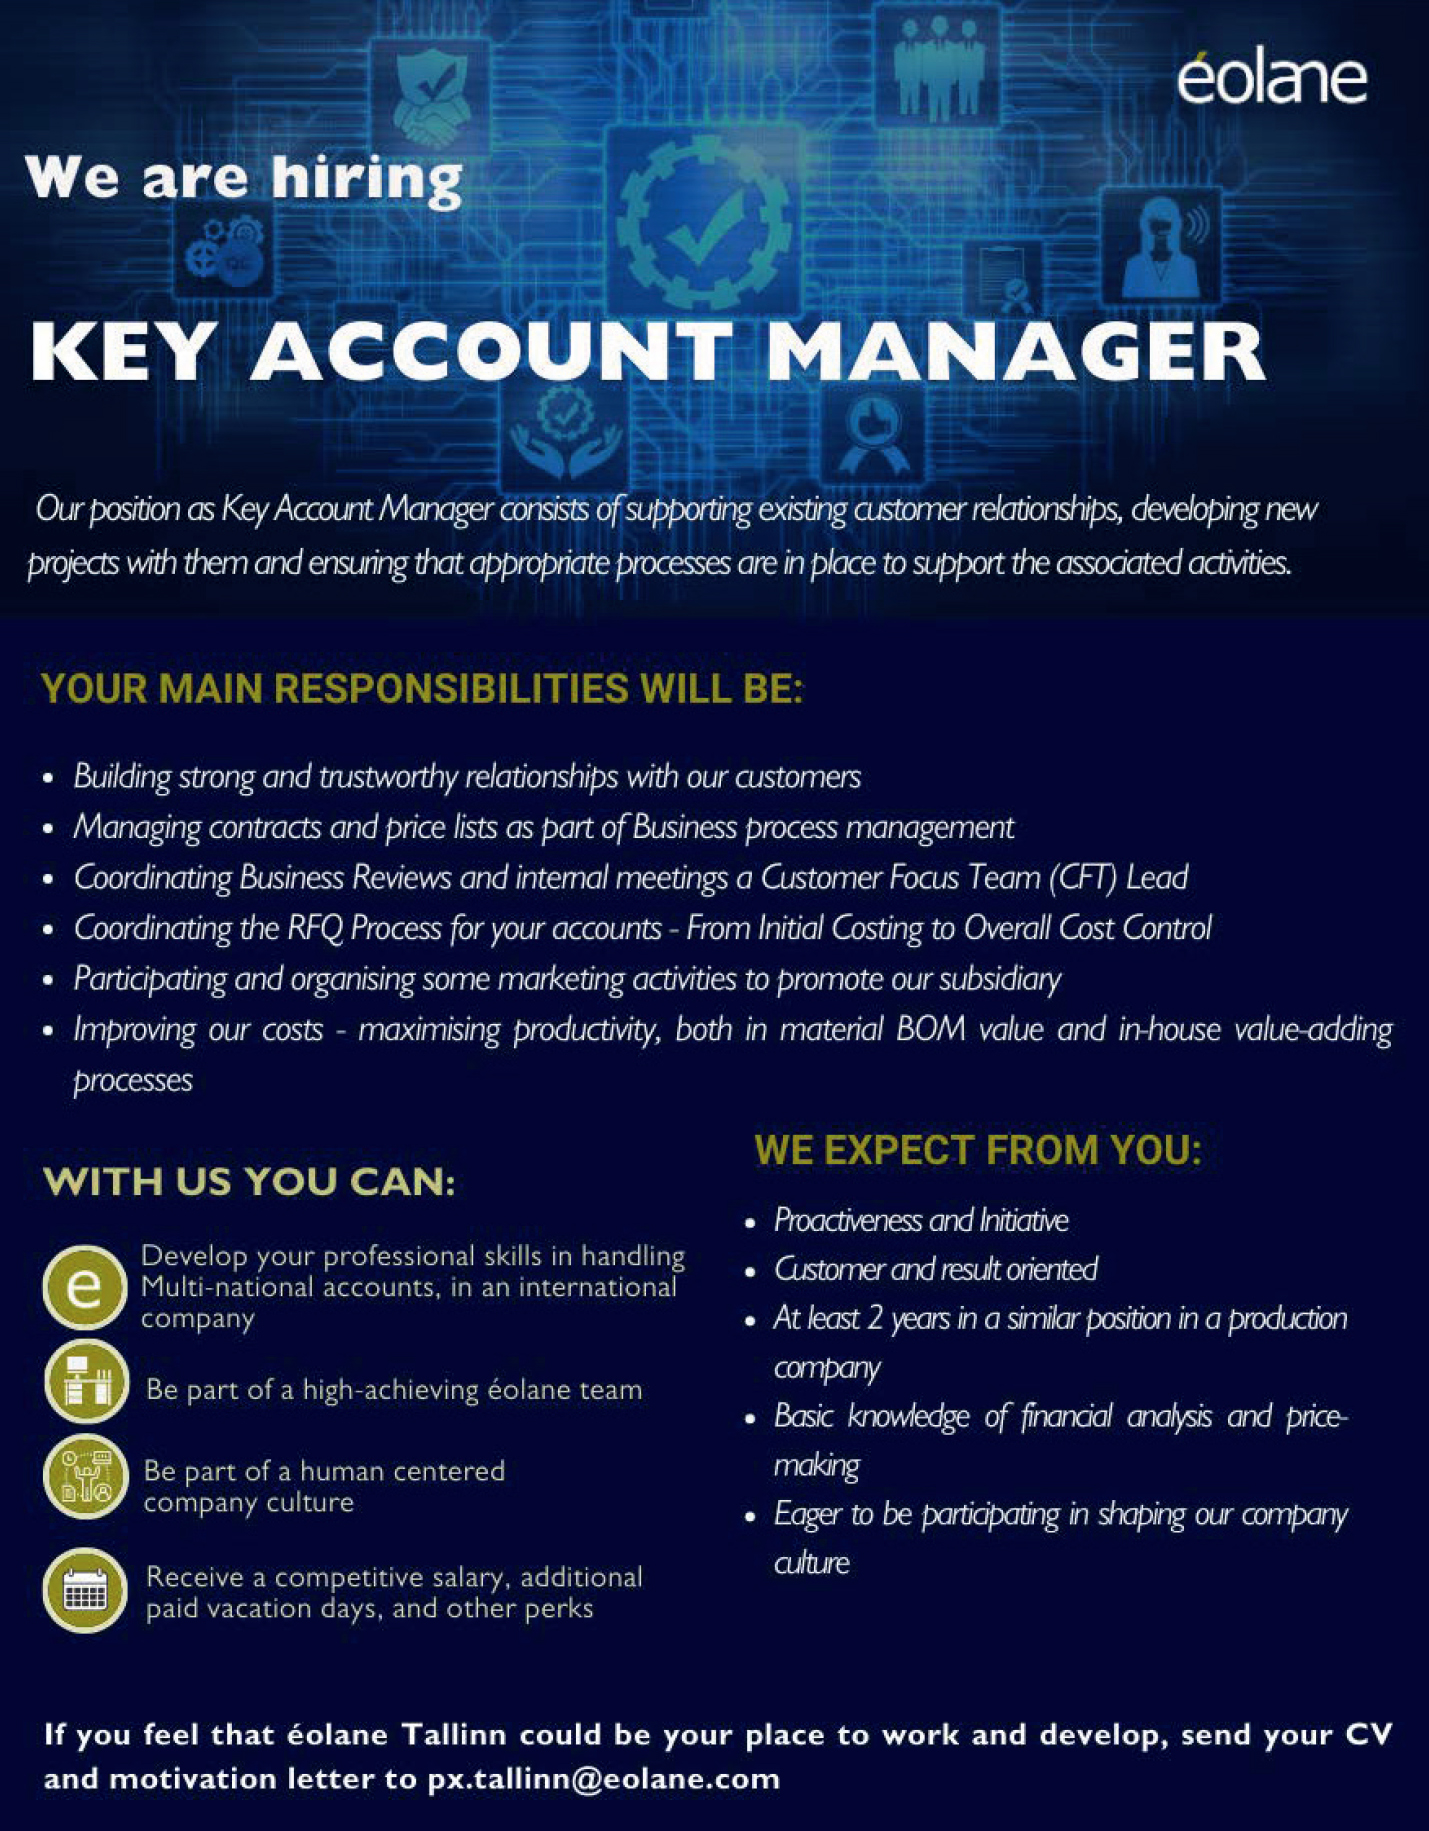 KEY ACCOUNT MANAGER